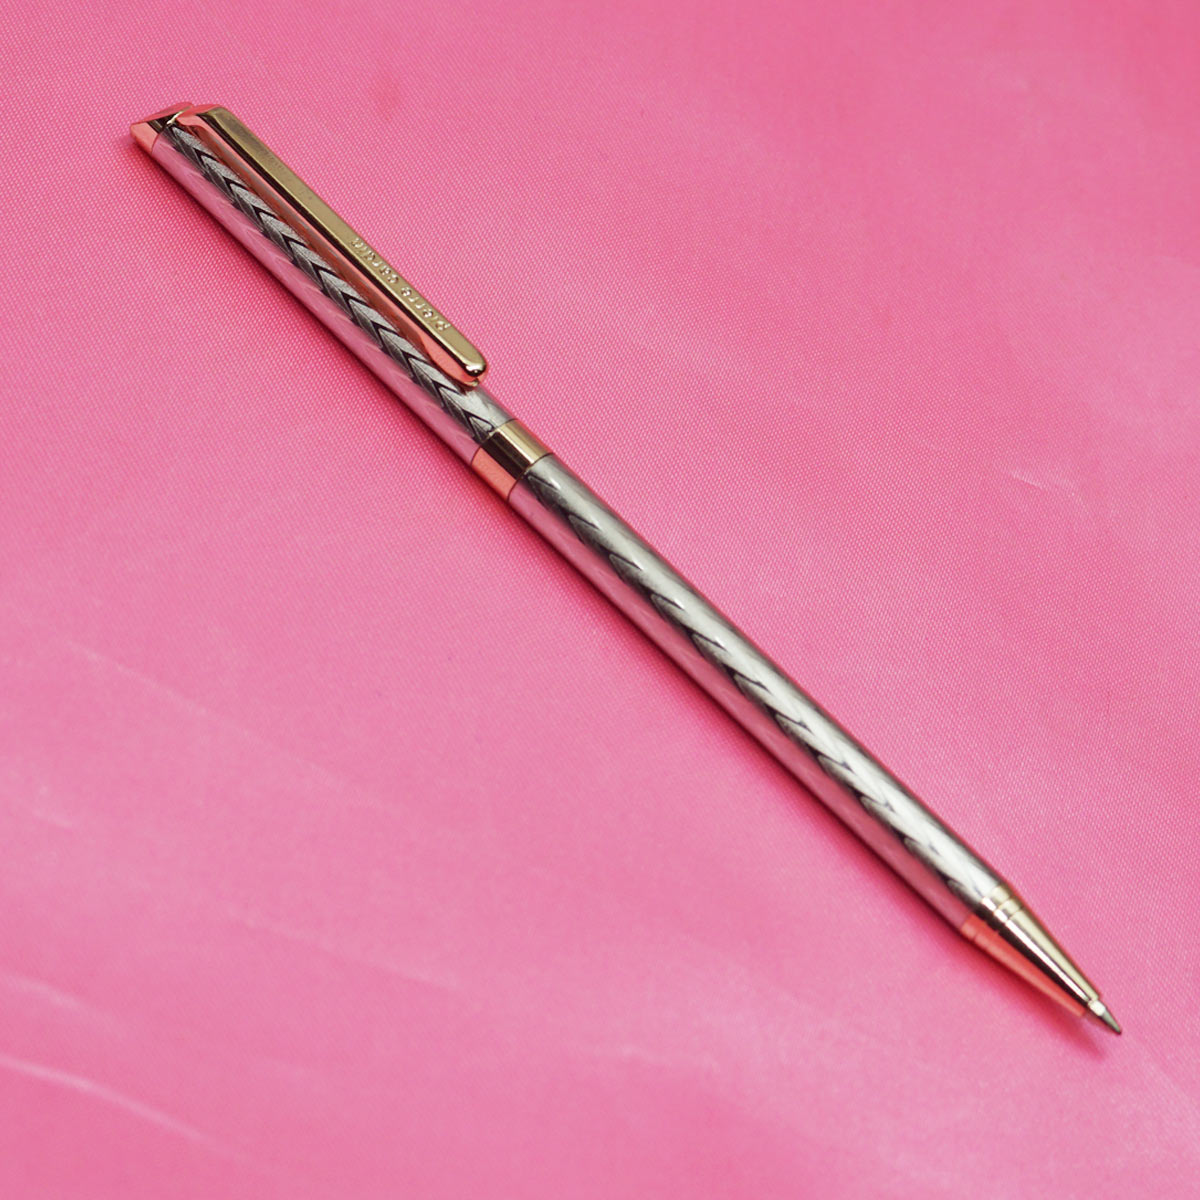 Pierre Cardin Decent Silver Color Body With Gold Clip and Golden Trims Medium Tip Twist Type Ball Pen SKU 22596